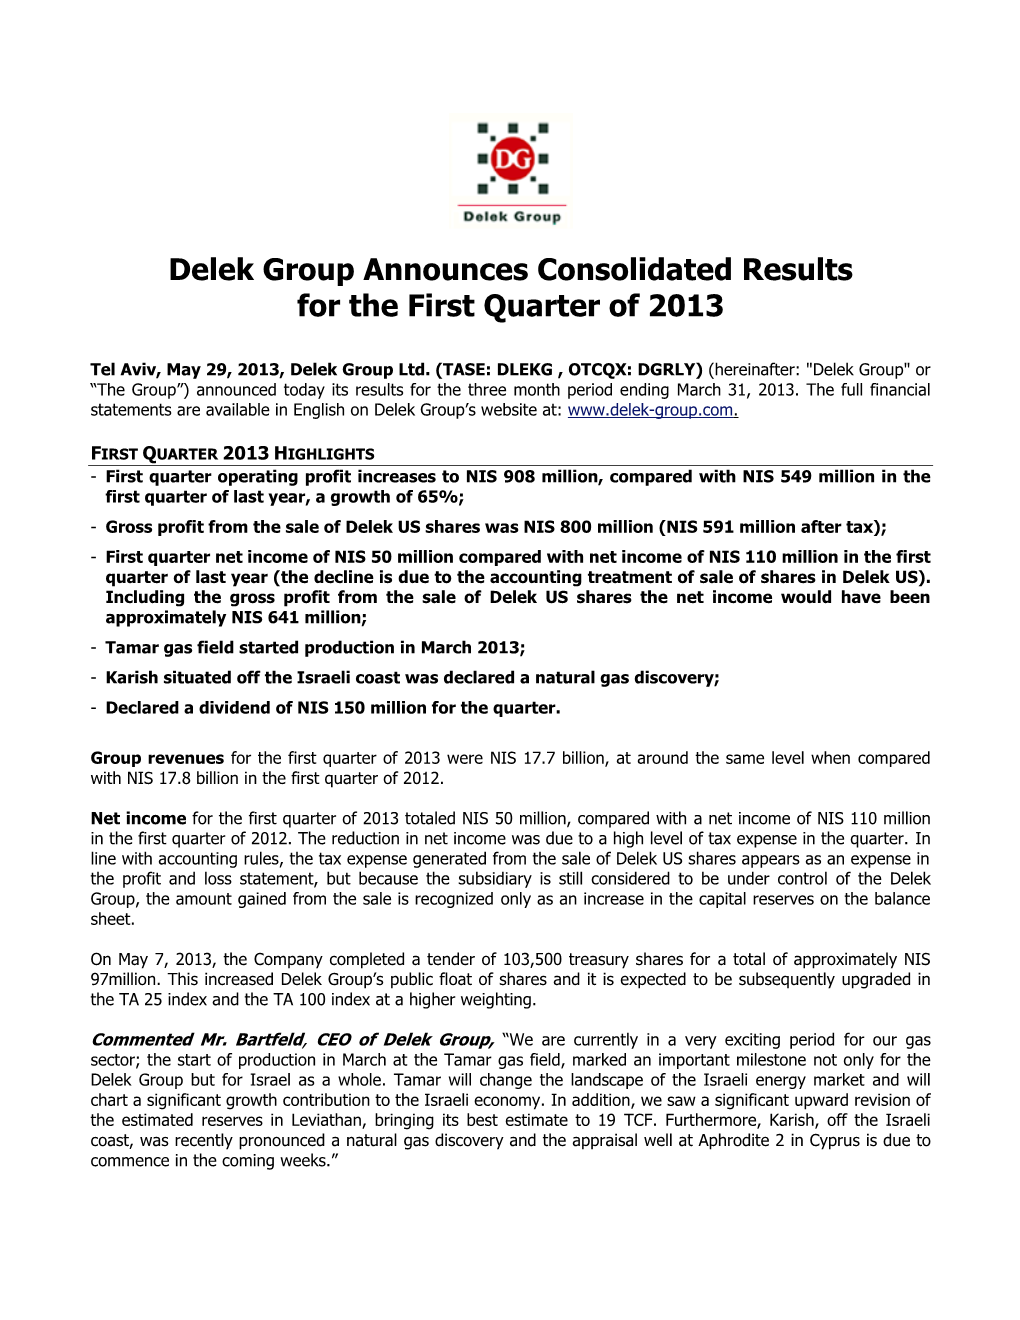 Delek Group Announces Consolidated Results for the First Quarter of 2013